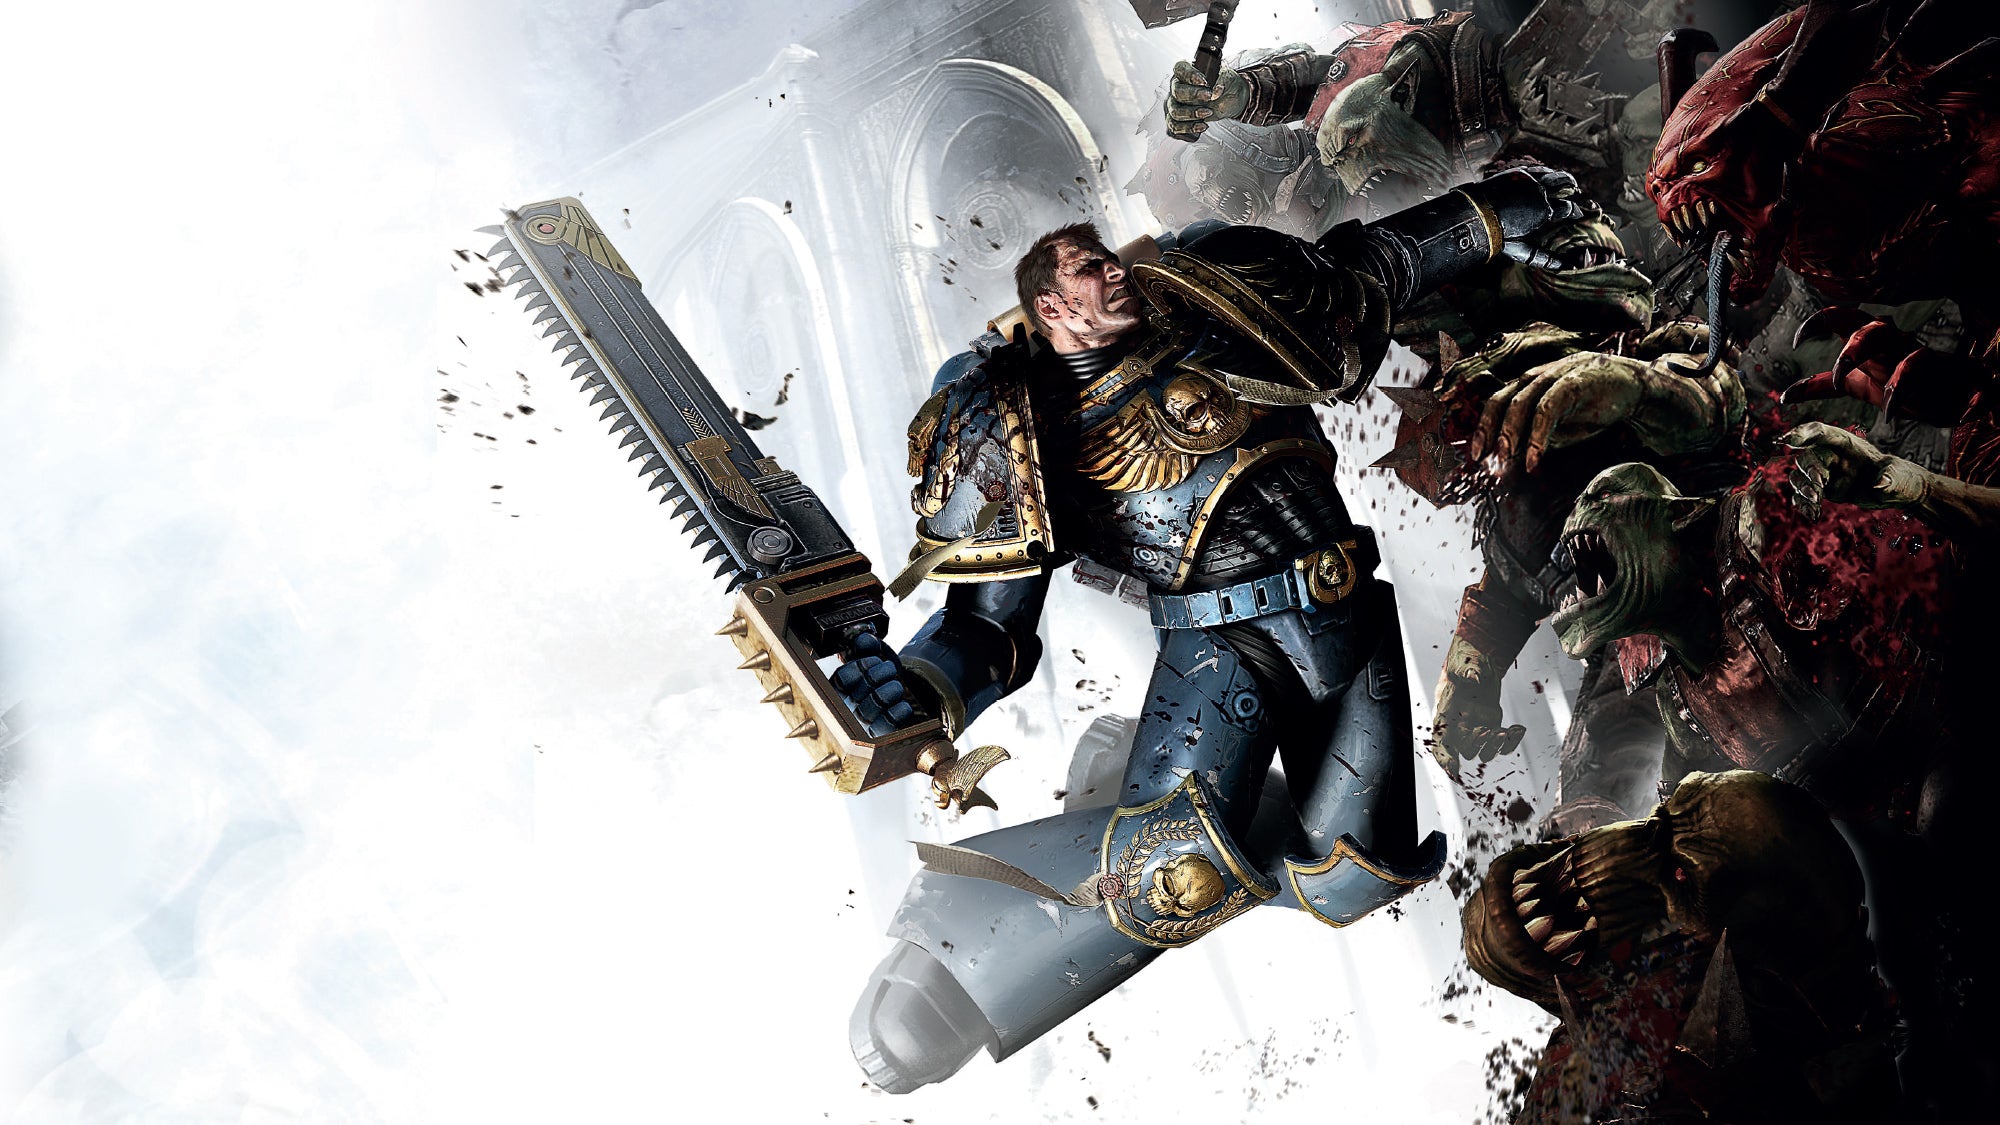 Official artwork from Warhammer 40,000: Space Marine.